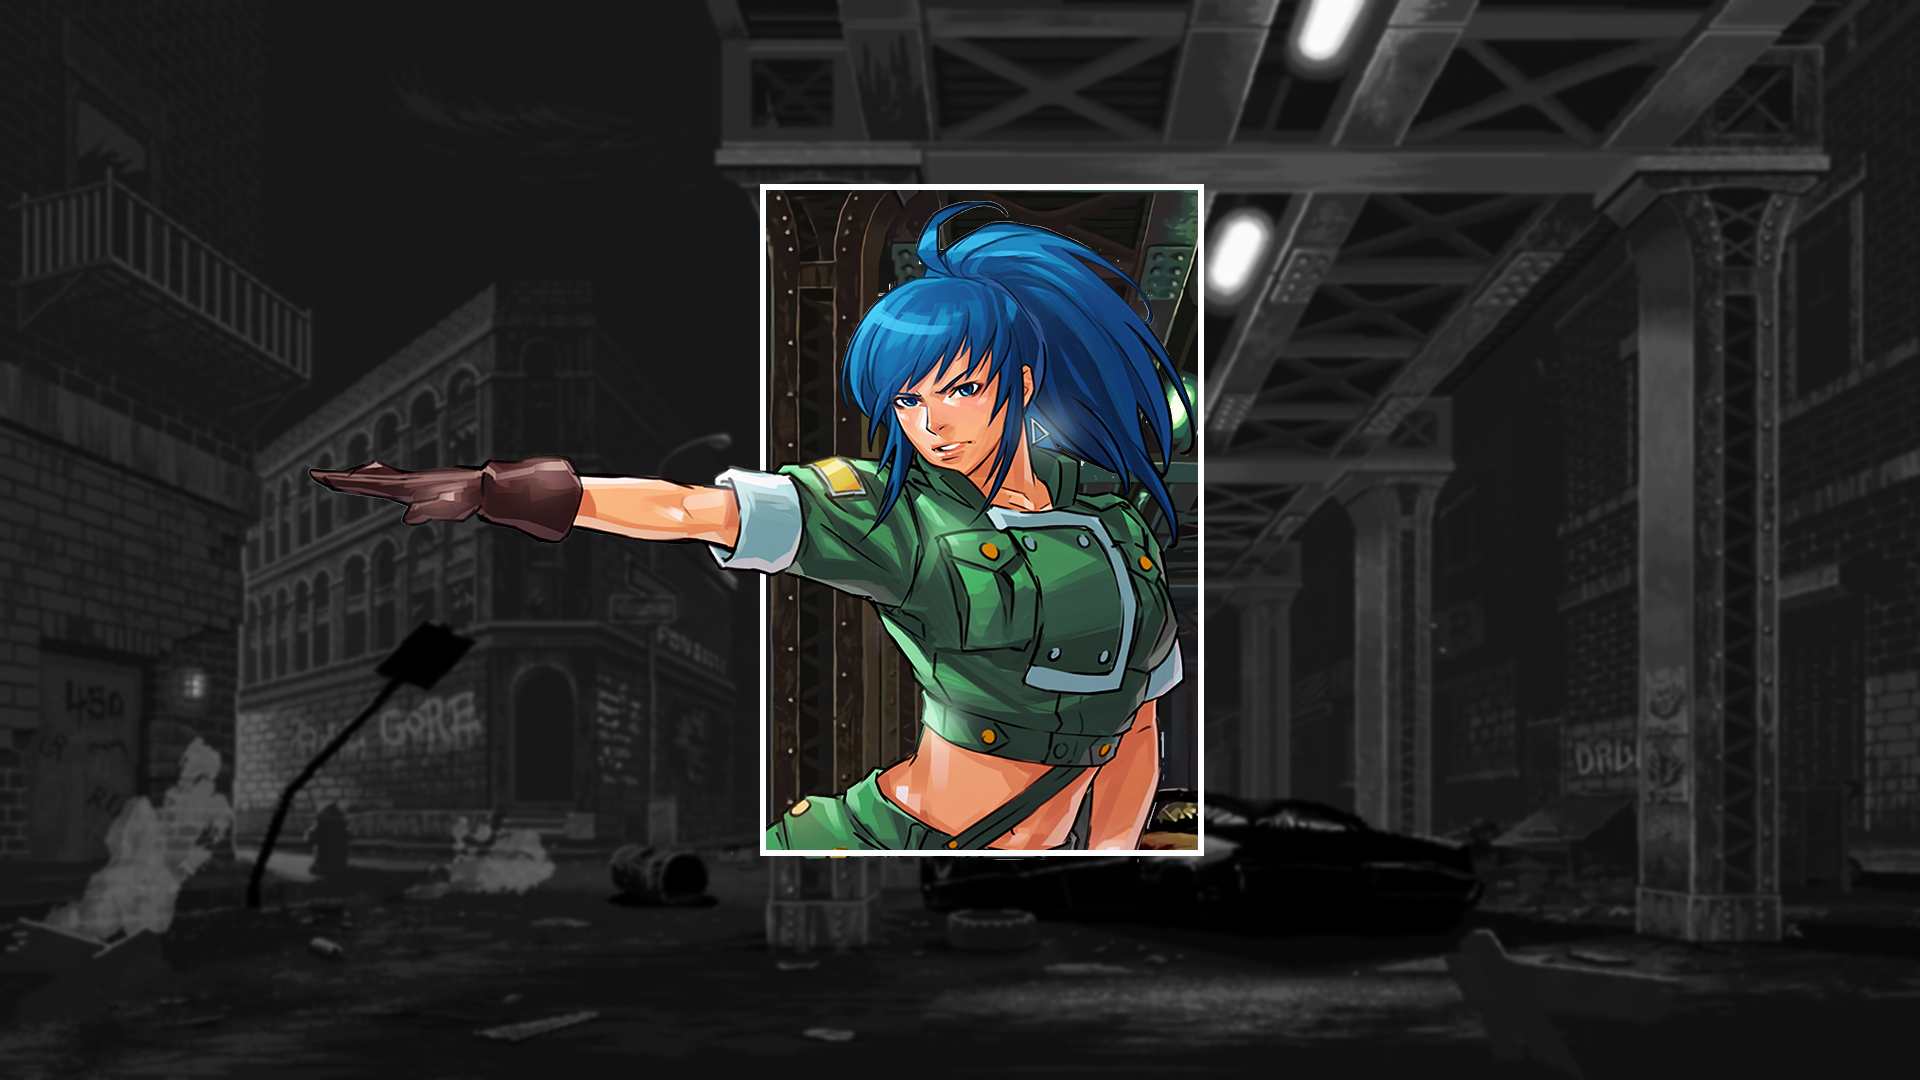 King Of Fighters Leona Heidern Video Games Fighting Games Picture In Picture SNK Blue Hair 1920x1080